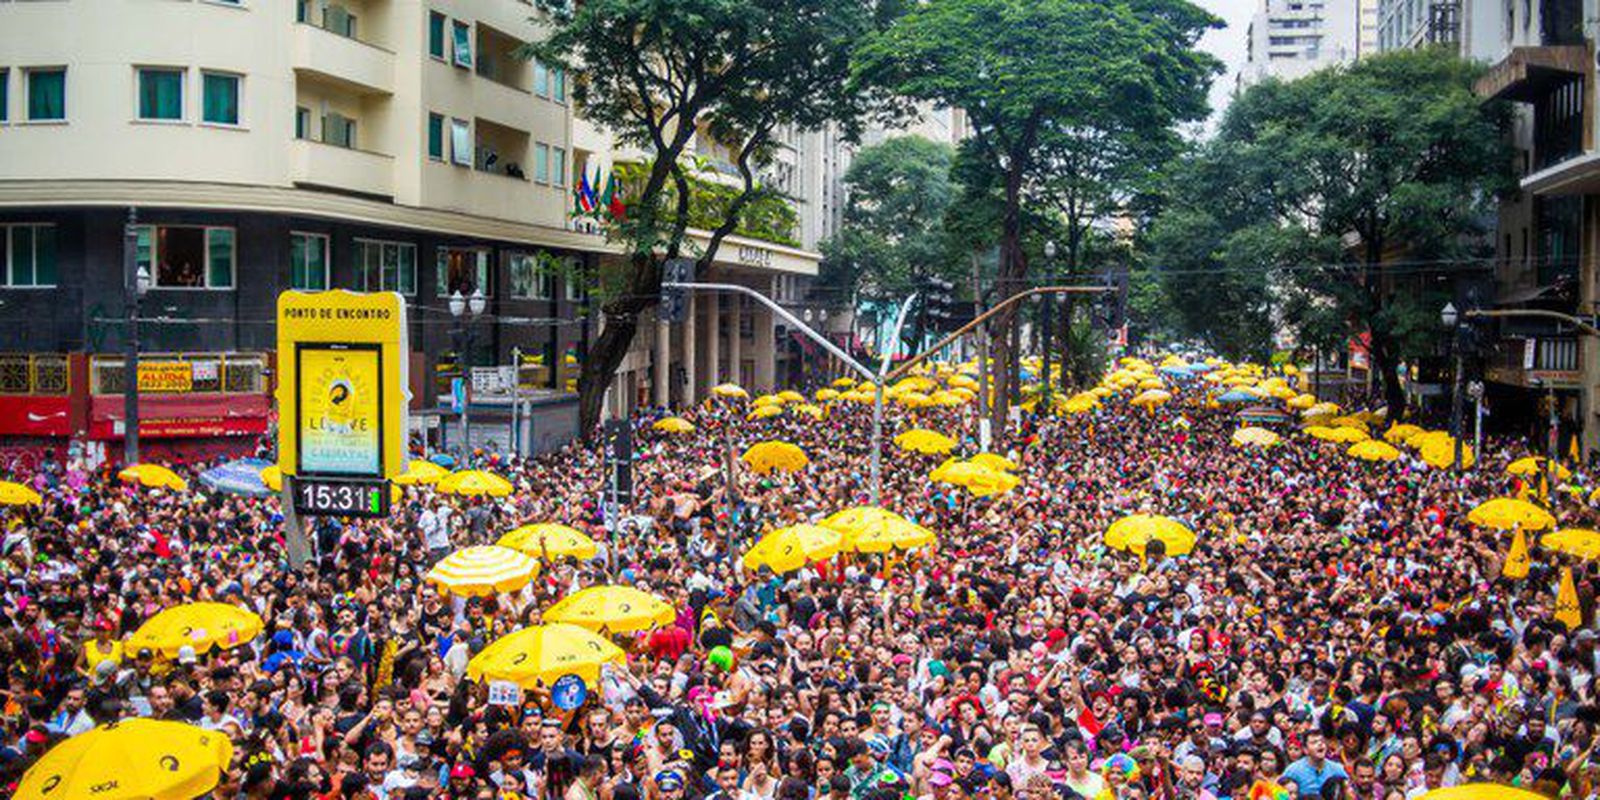 City Hall of SP points to participation of 15 million in Carnival